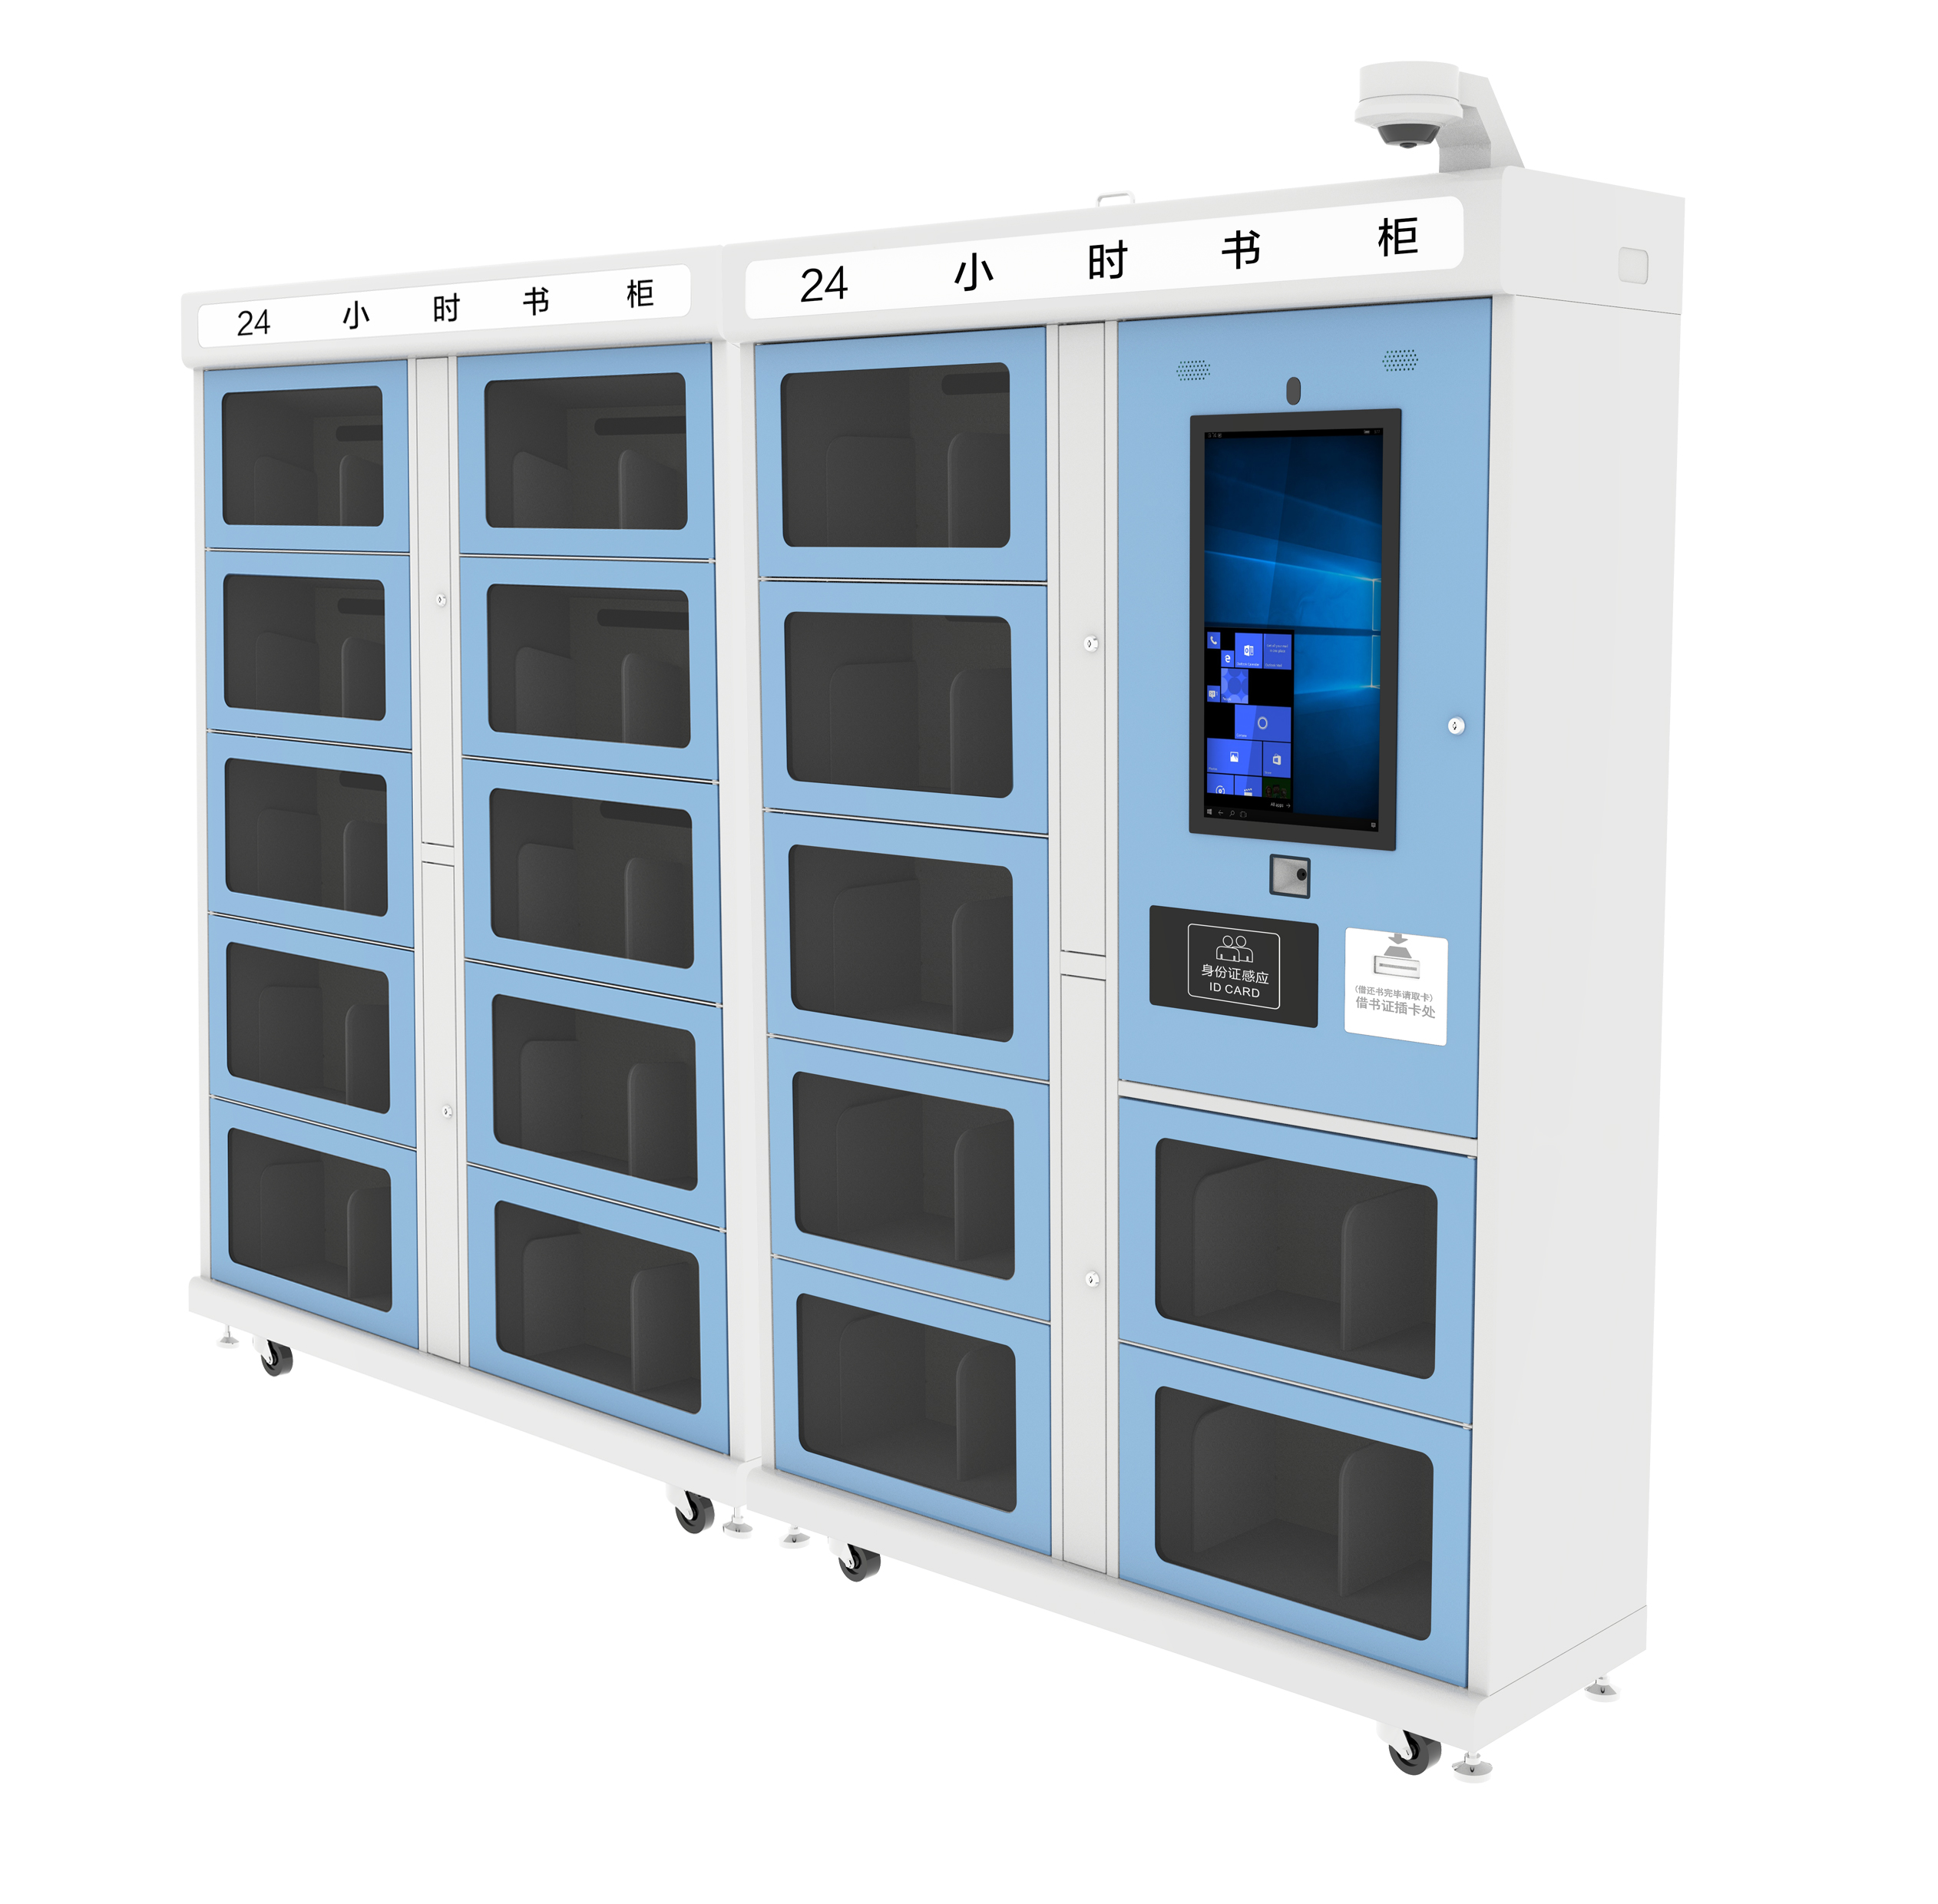 Smart RFID Book Borrowing Locker UHF 24-hours Self Service Cabinet for Library Outreach/Office/Public Places AL5109